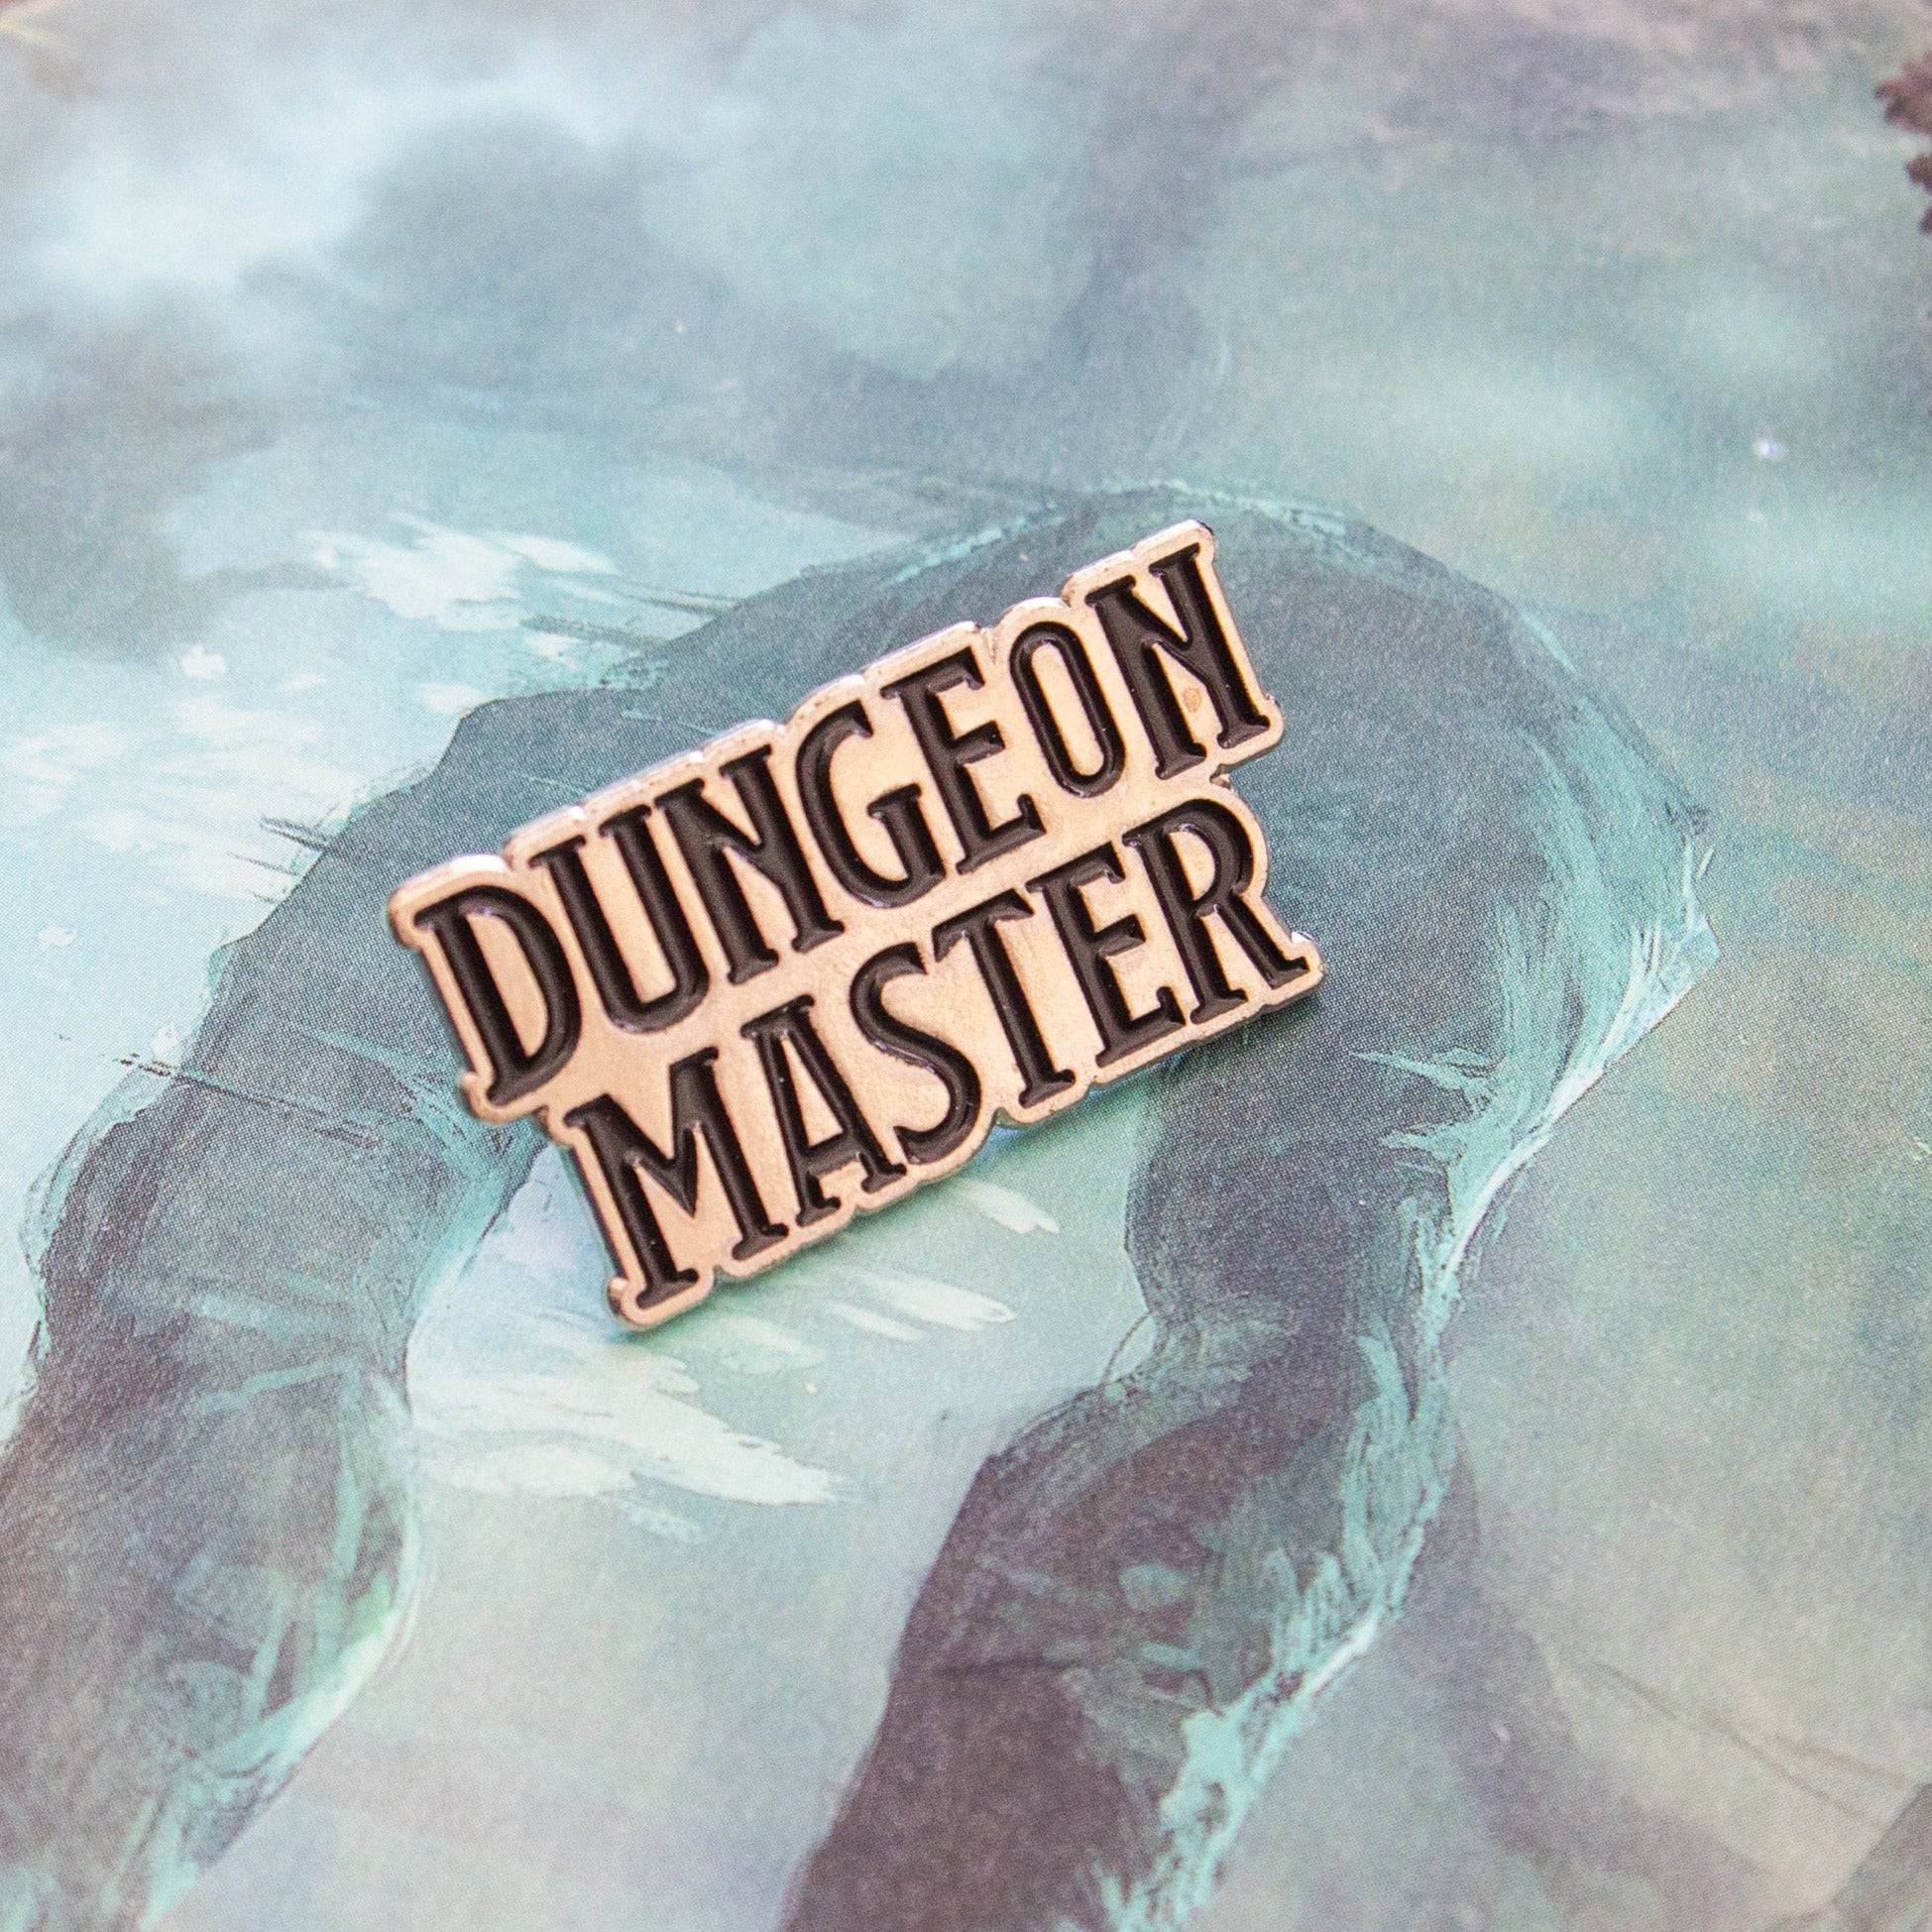 Dungeon Master Pin - Mystery Dice Goblin